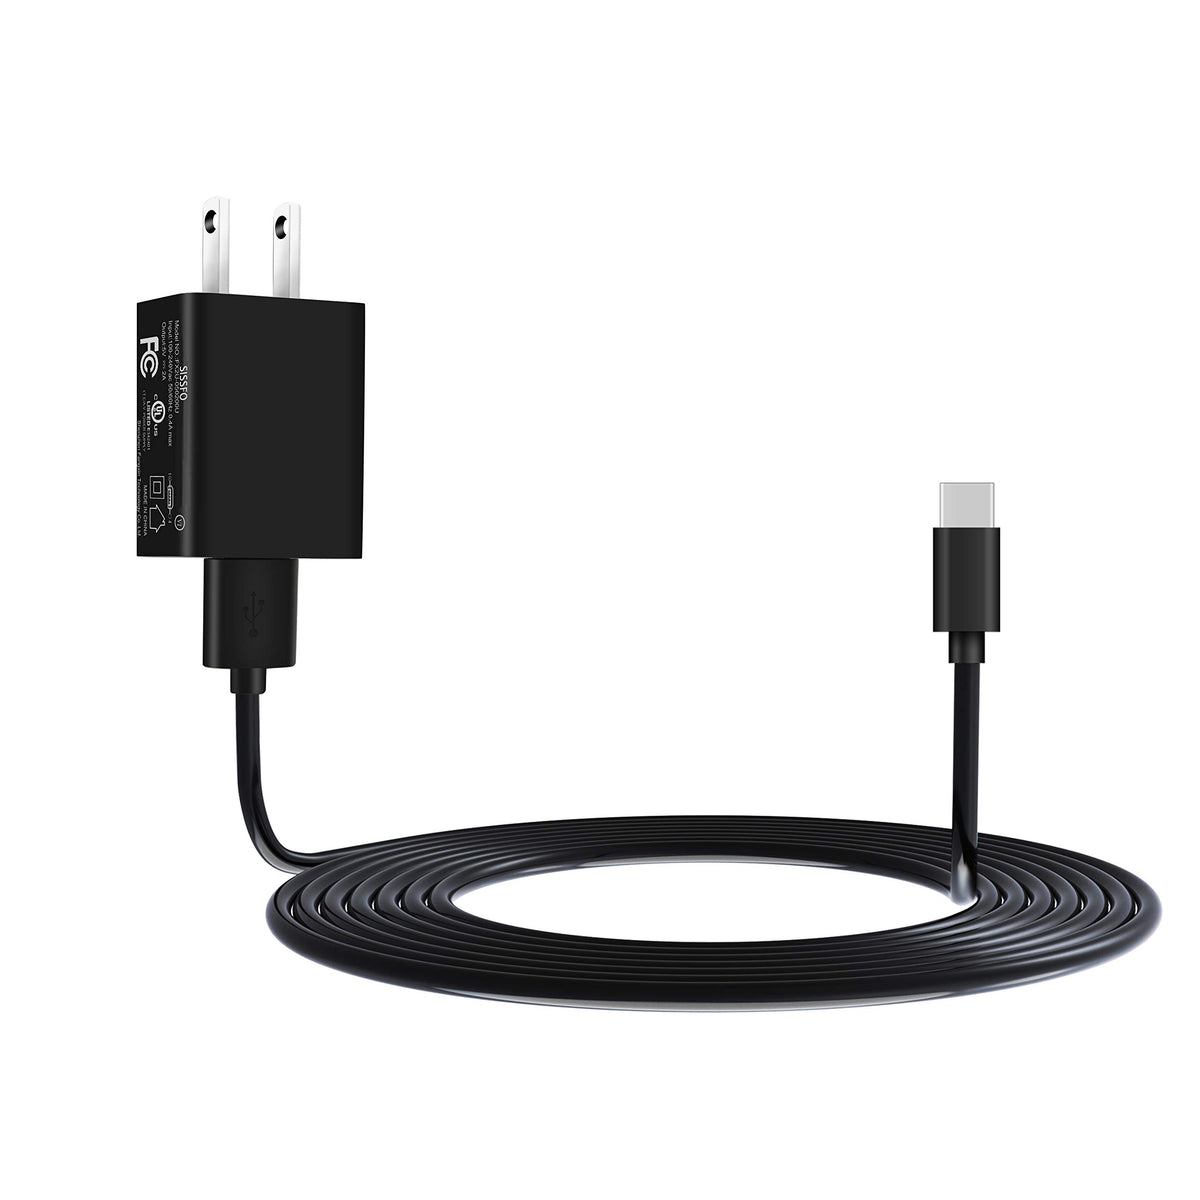 Fast Charger with 6Ft USB Type-C&Micro USB Cable for Charging All-New Fire 6 HD 7 8 10/Fire Max 11-13th Gen/Fire HD 7 8 10Plus/Kids Edition Kids Pro/All E-Reader,Oasis,Paperwhite/Samsung Galaxy Tab A